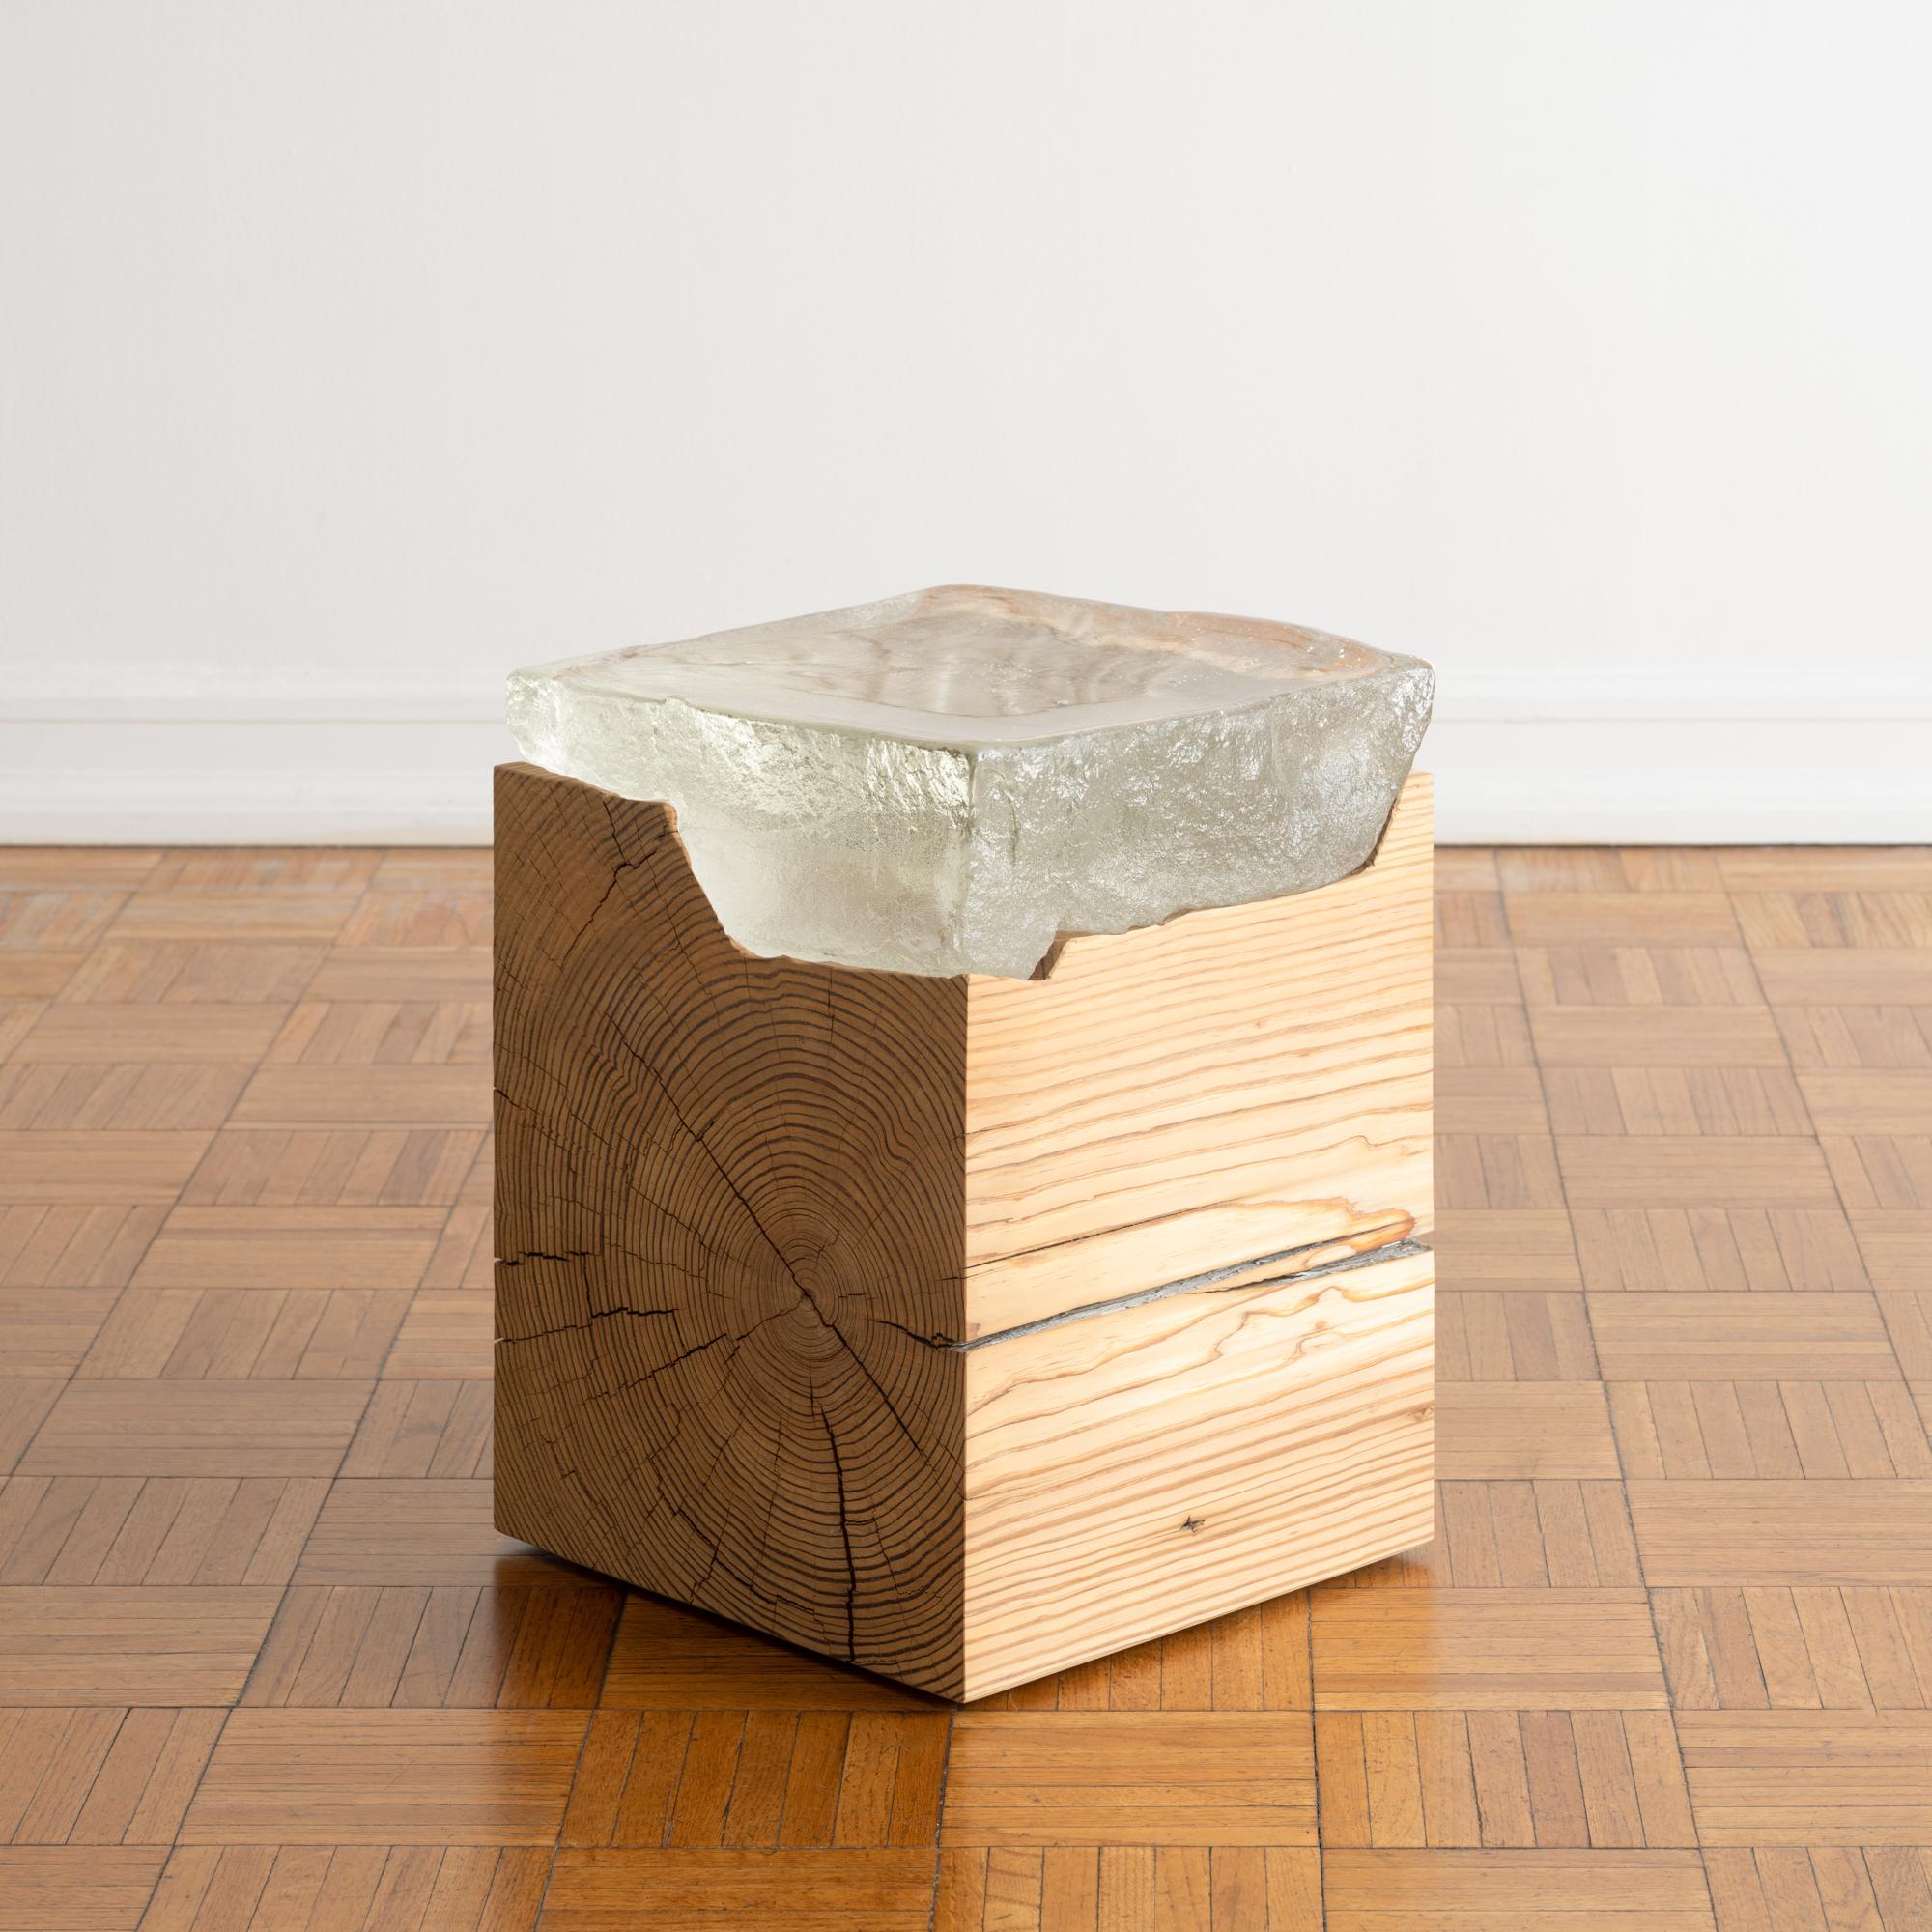 One-of-a-kind side or end table in hand-carved reclaimed wood with cast glass top. Fueled by curiosity while pushing function and materiality to its limits, this piece would make an evocative yet understated sculptural accent to your design project.